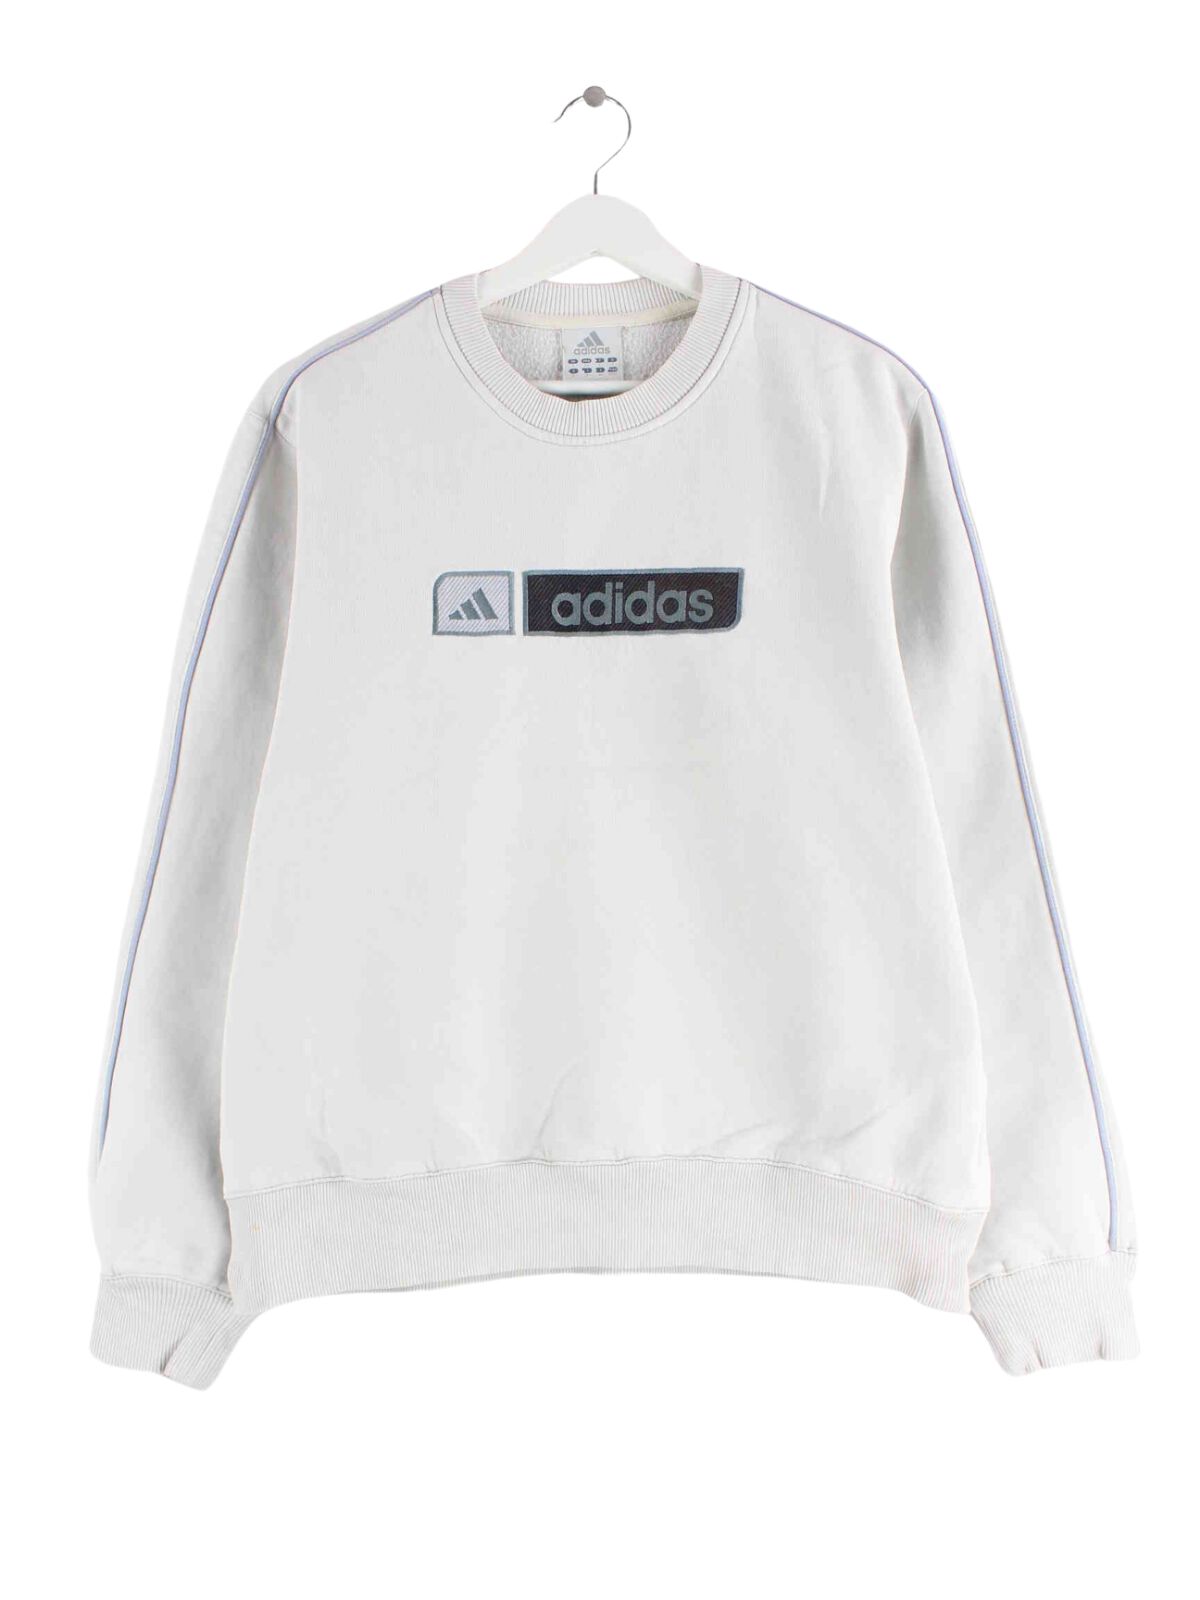 Adidas y2k Embroidered Sweater Beige S (front image)